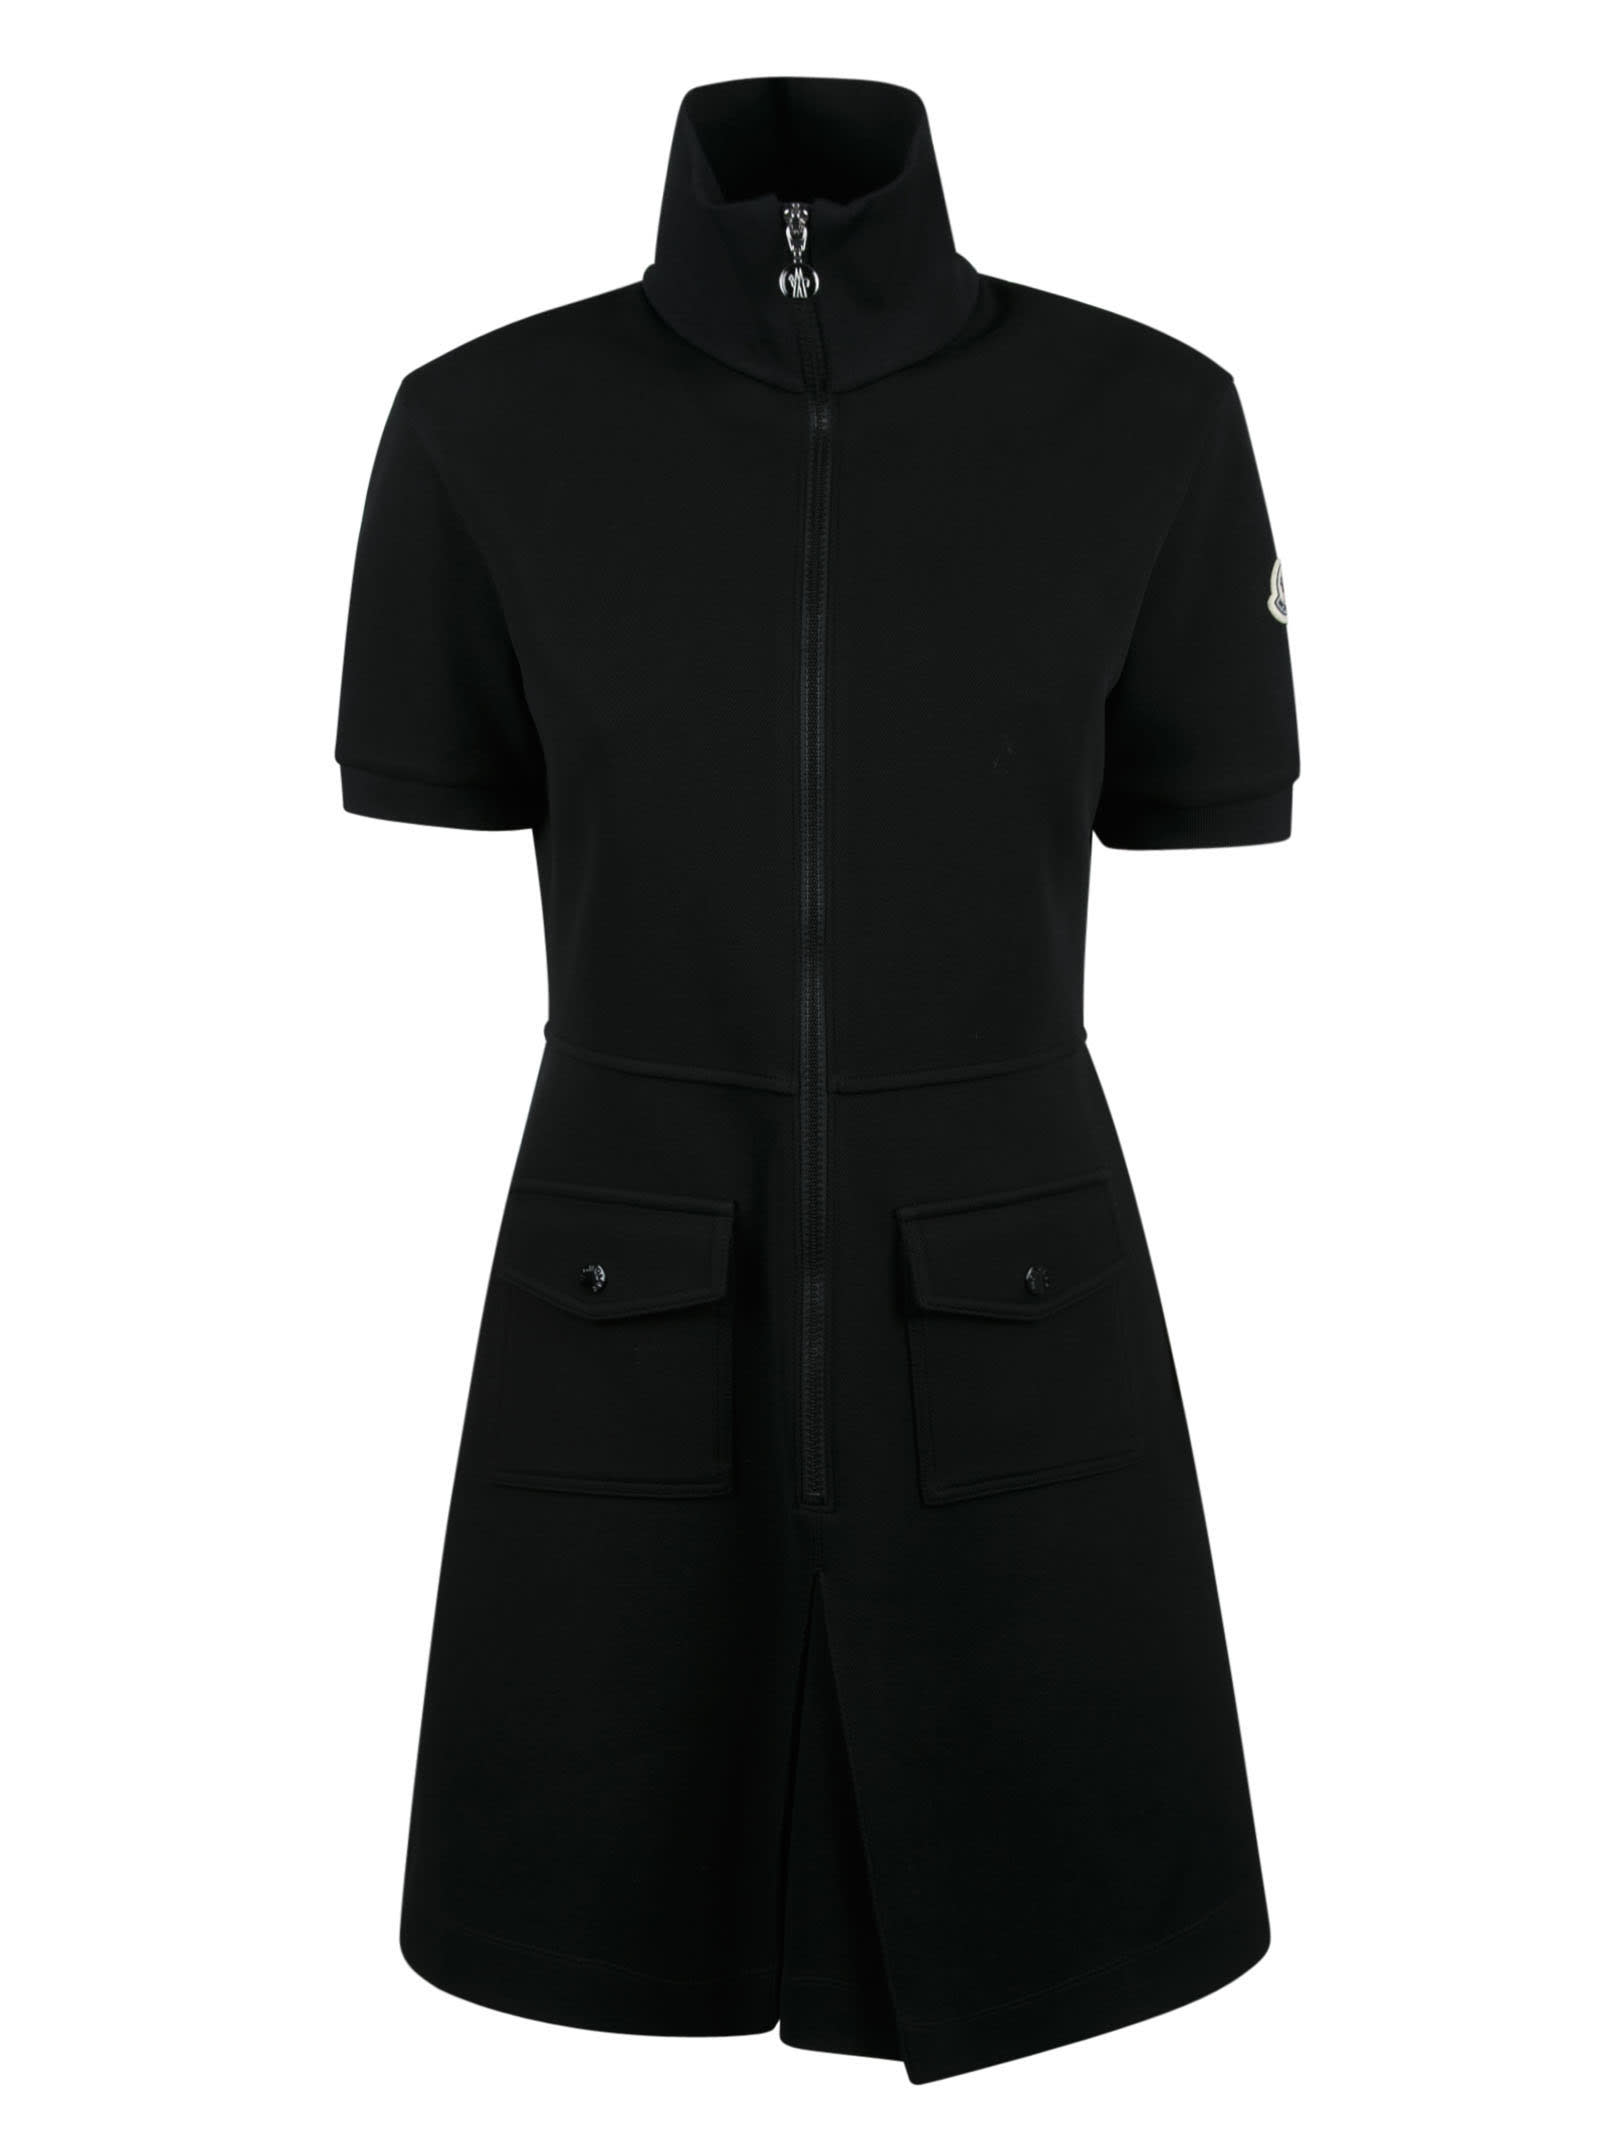 MONCLER LOGO PATCHED ROLLNECK ZIPPED DRESS